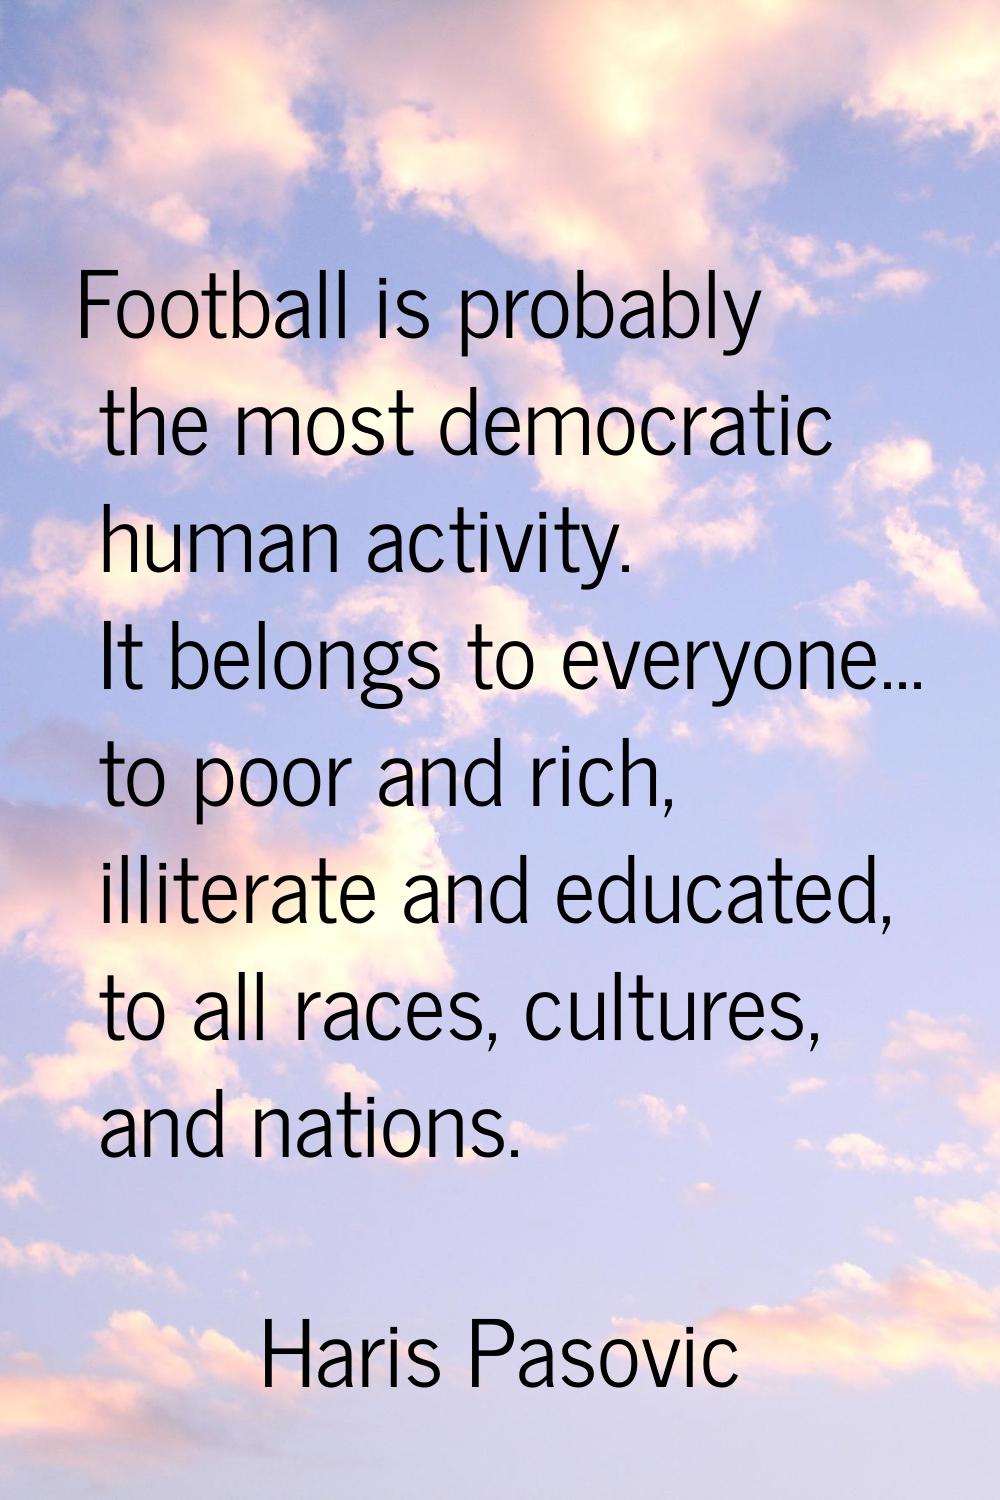 Football is probably the most democratic human activity. It belongs to everyone... to poor and rich